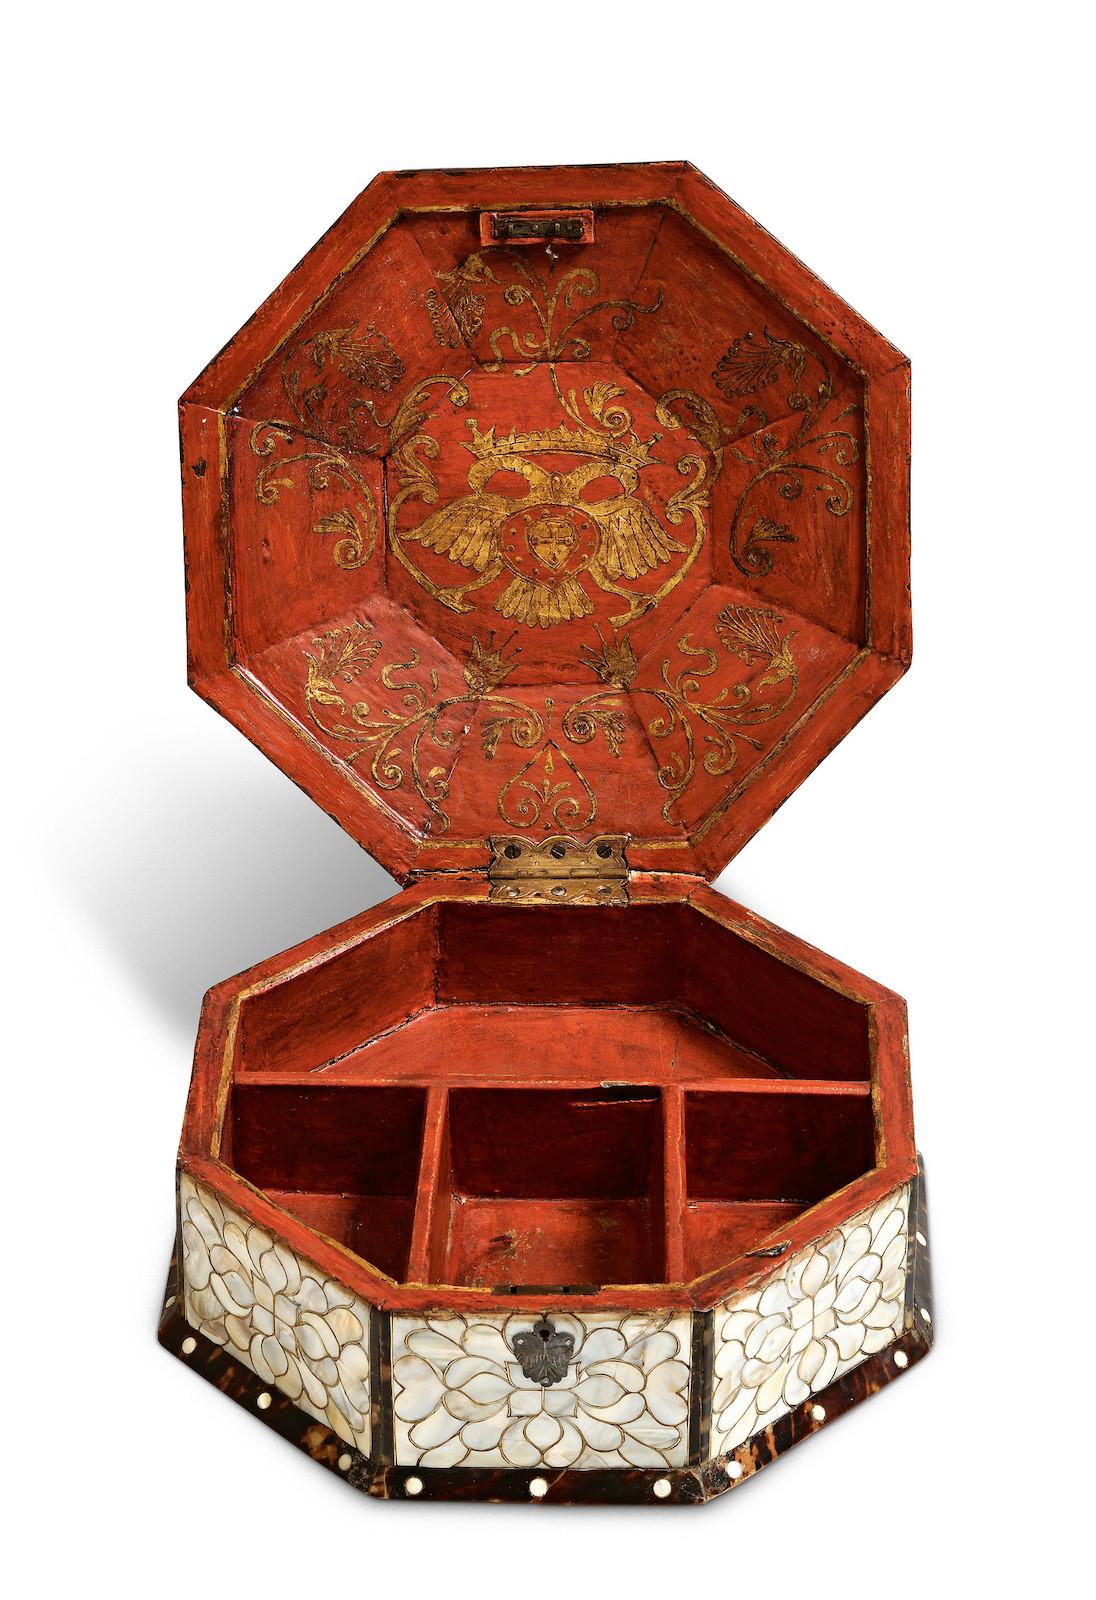 Sewing or Jewelry Box (Costurero o joyero), Guatemala (for export market, possibly Peru), last third of the 18th century. open